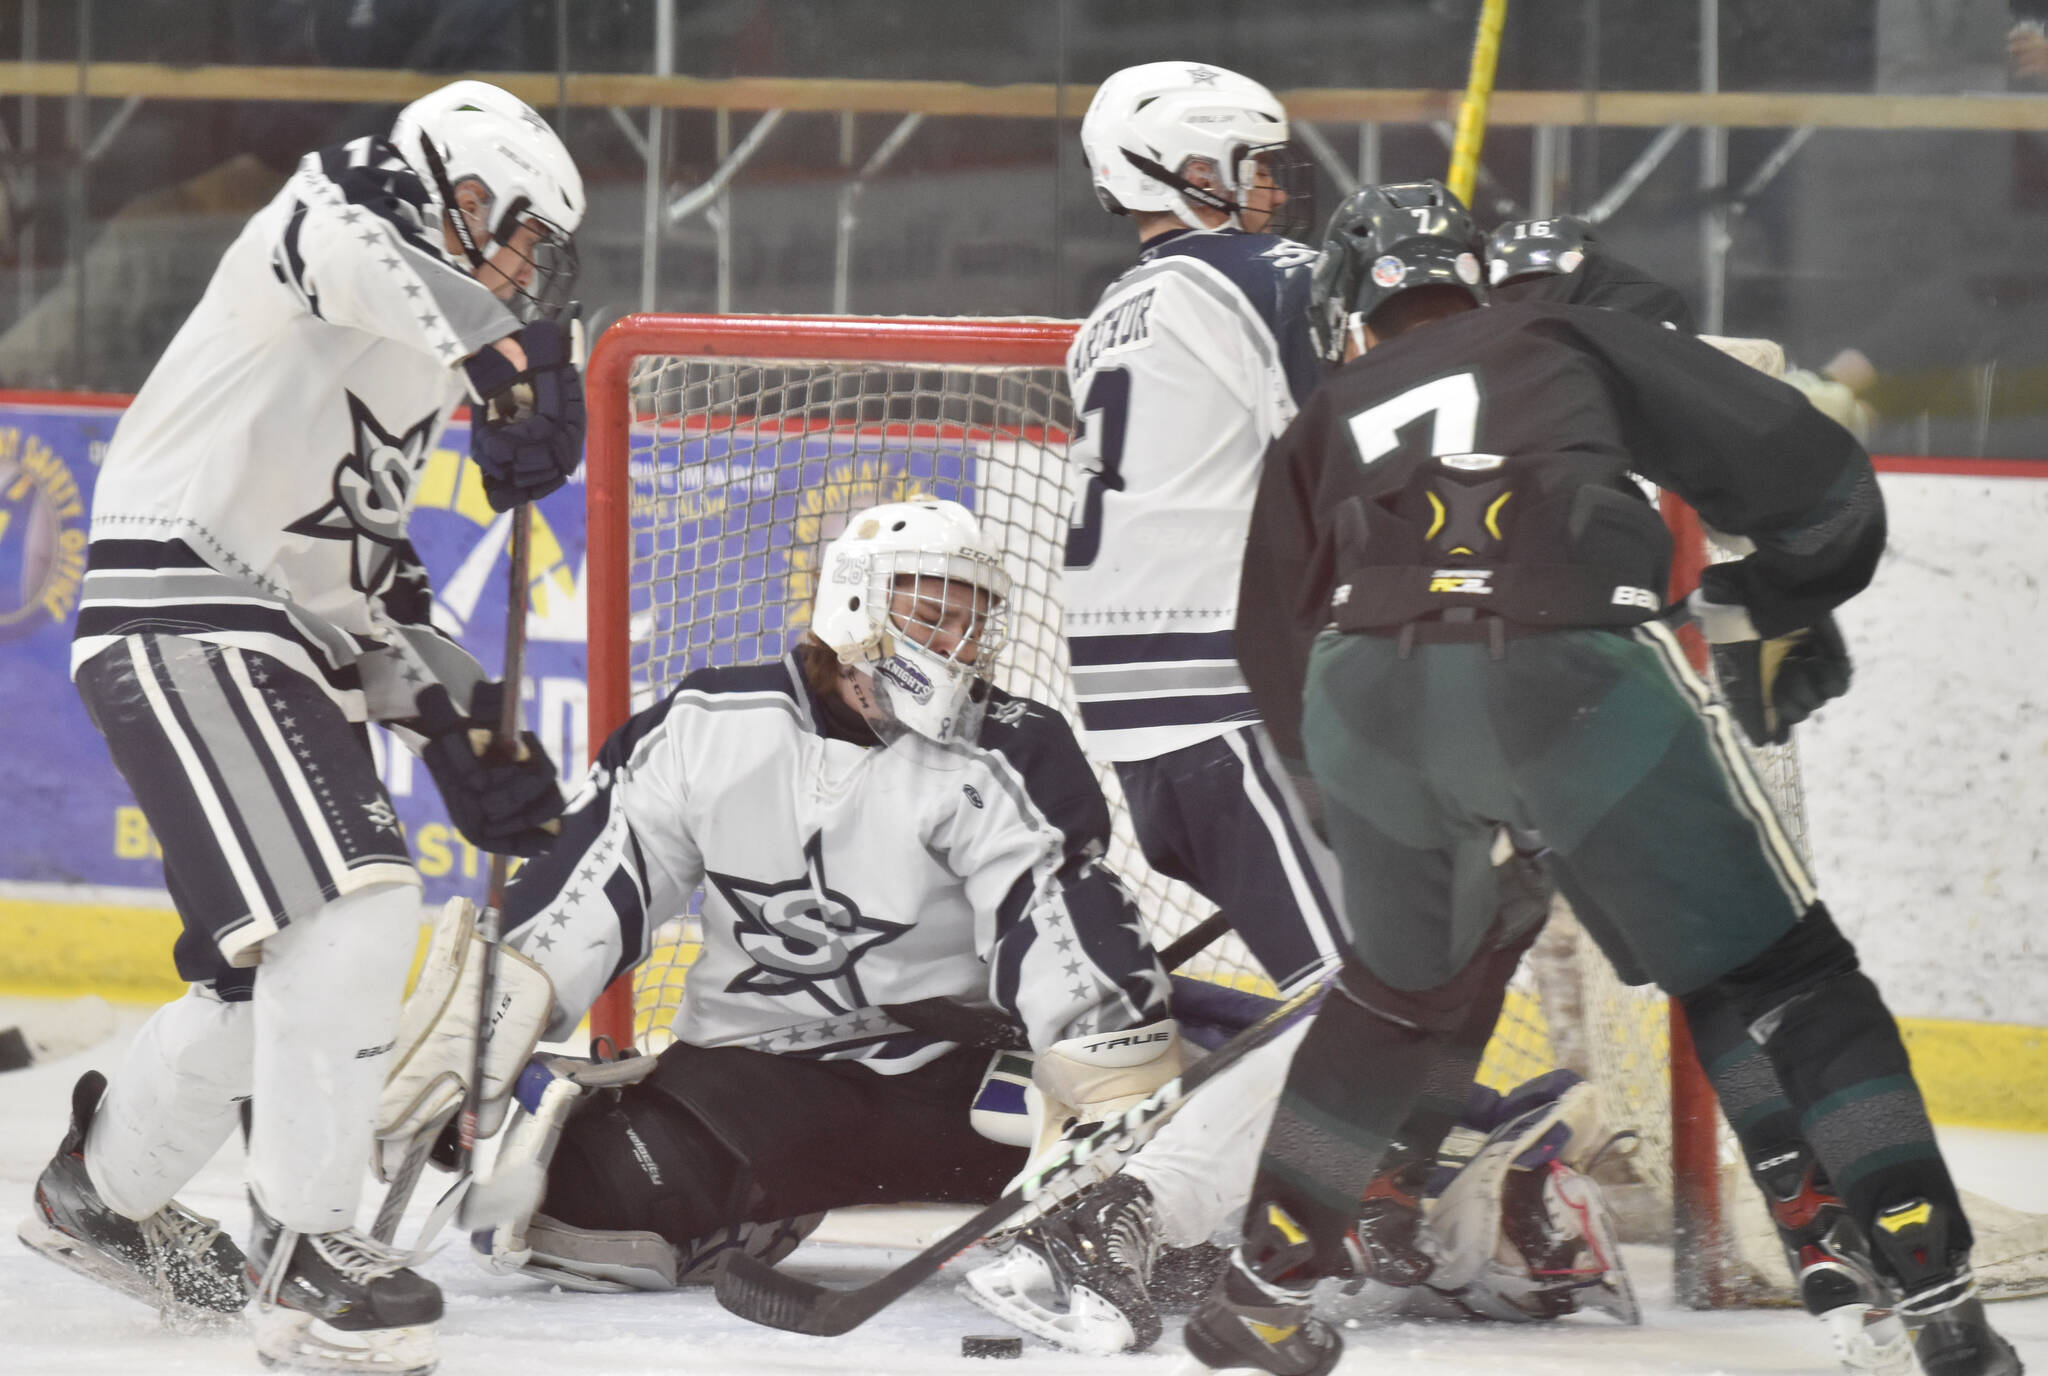 Soldotna goalie Jackson Purcell makes a save in front of defesenmen Aiden Burcham and Andrew Arthur and Colony’s Jerad Hacker on Saturday, Jan. 7, 2023, at the Soldotna Regional Sports Complex in Soldotna, Alaska. (Photo by Jeff Helminiak/Peninsula Clarion)